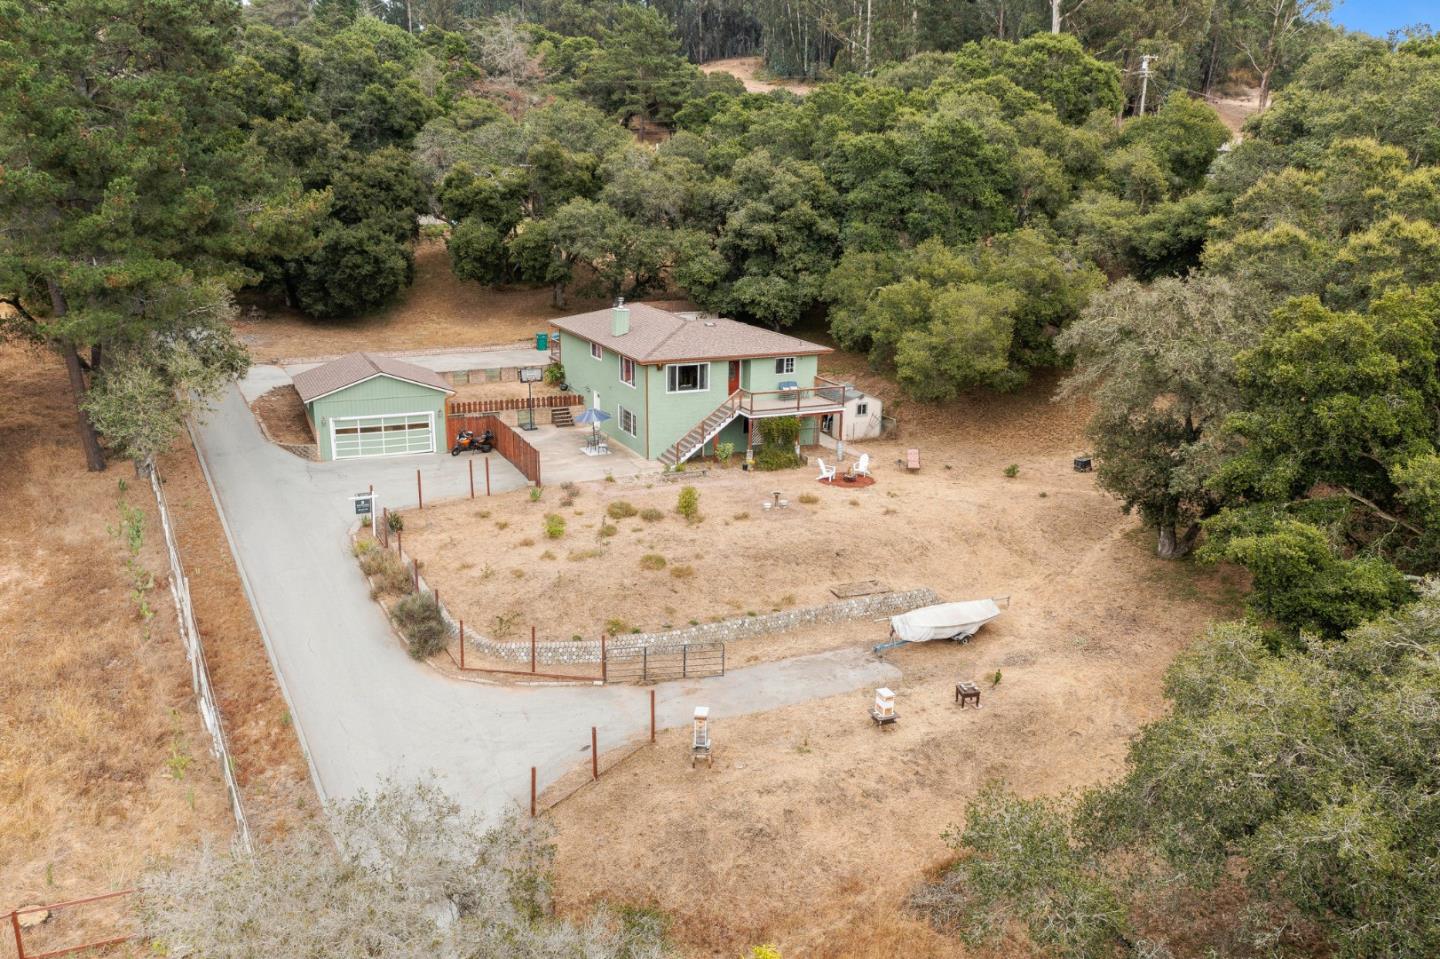 an aerial view of a house with yard and trees in the background